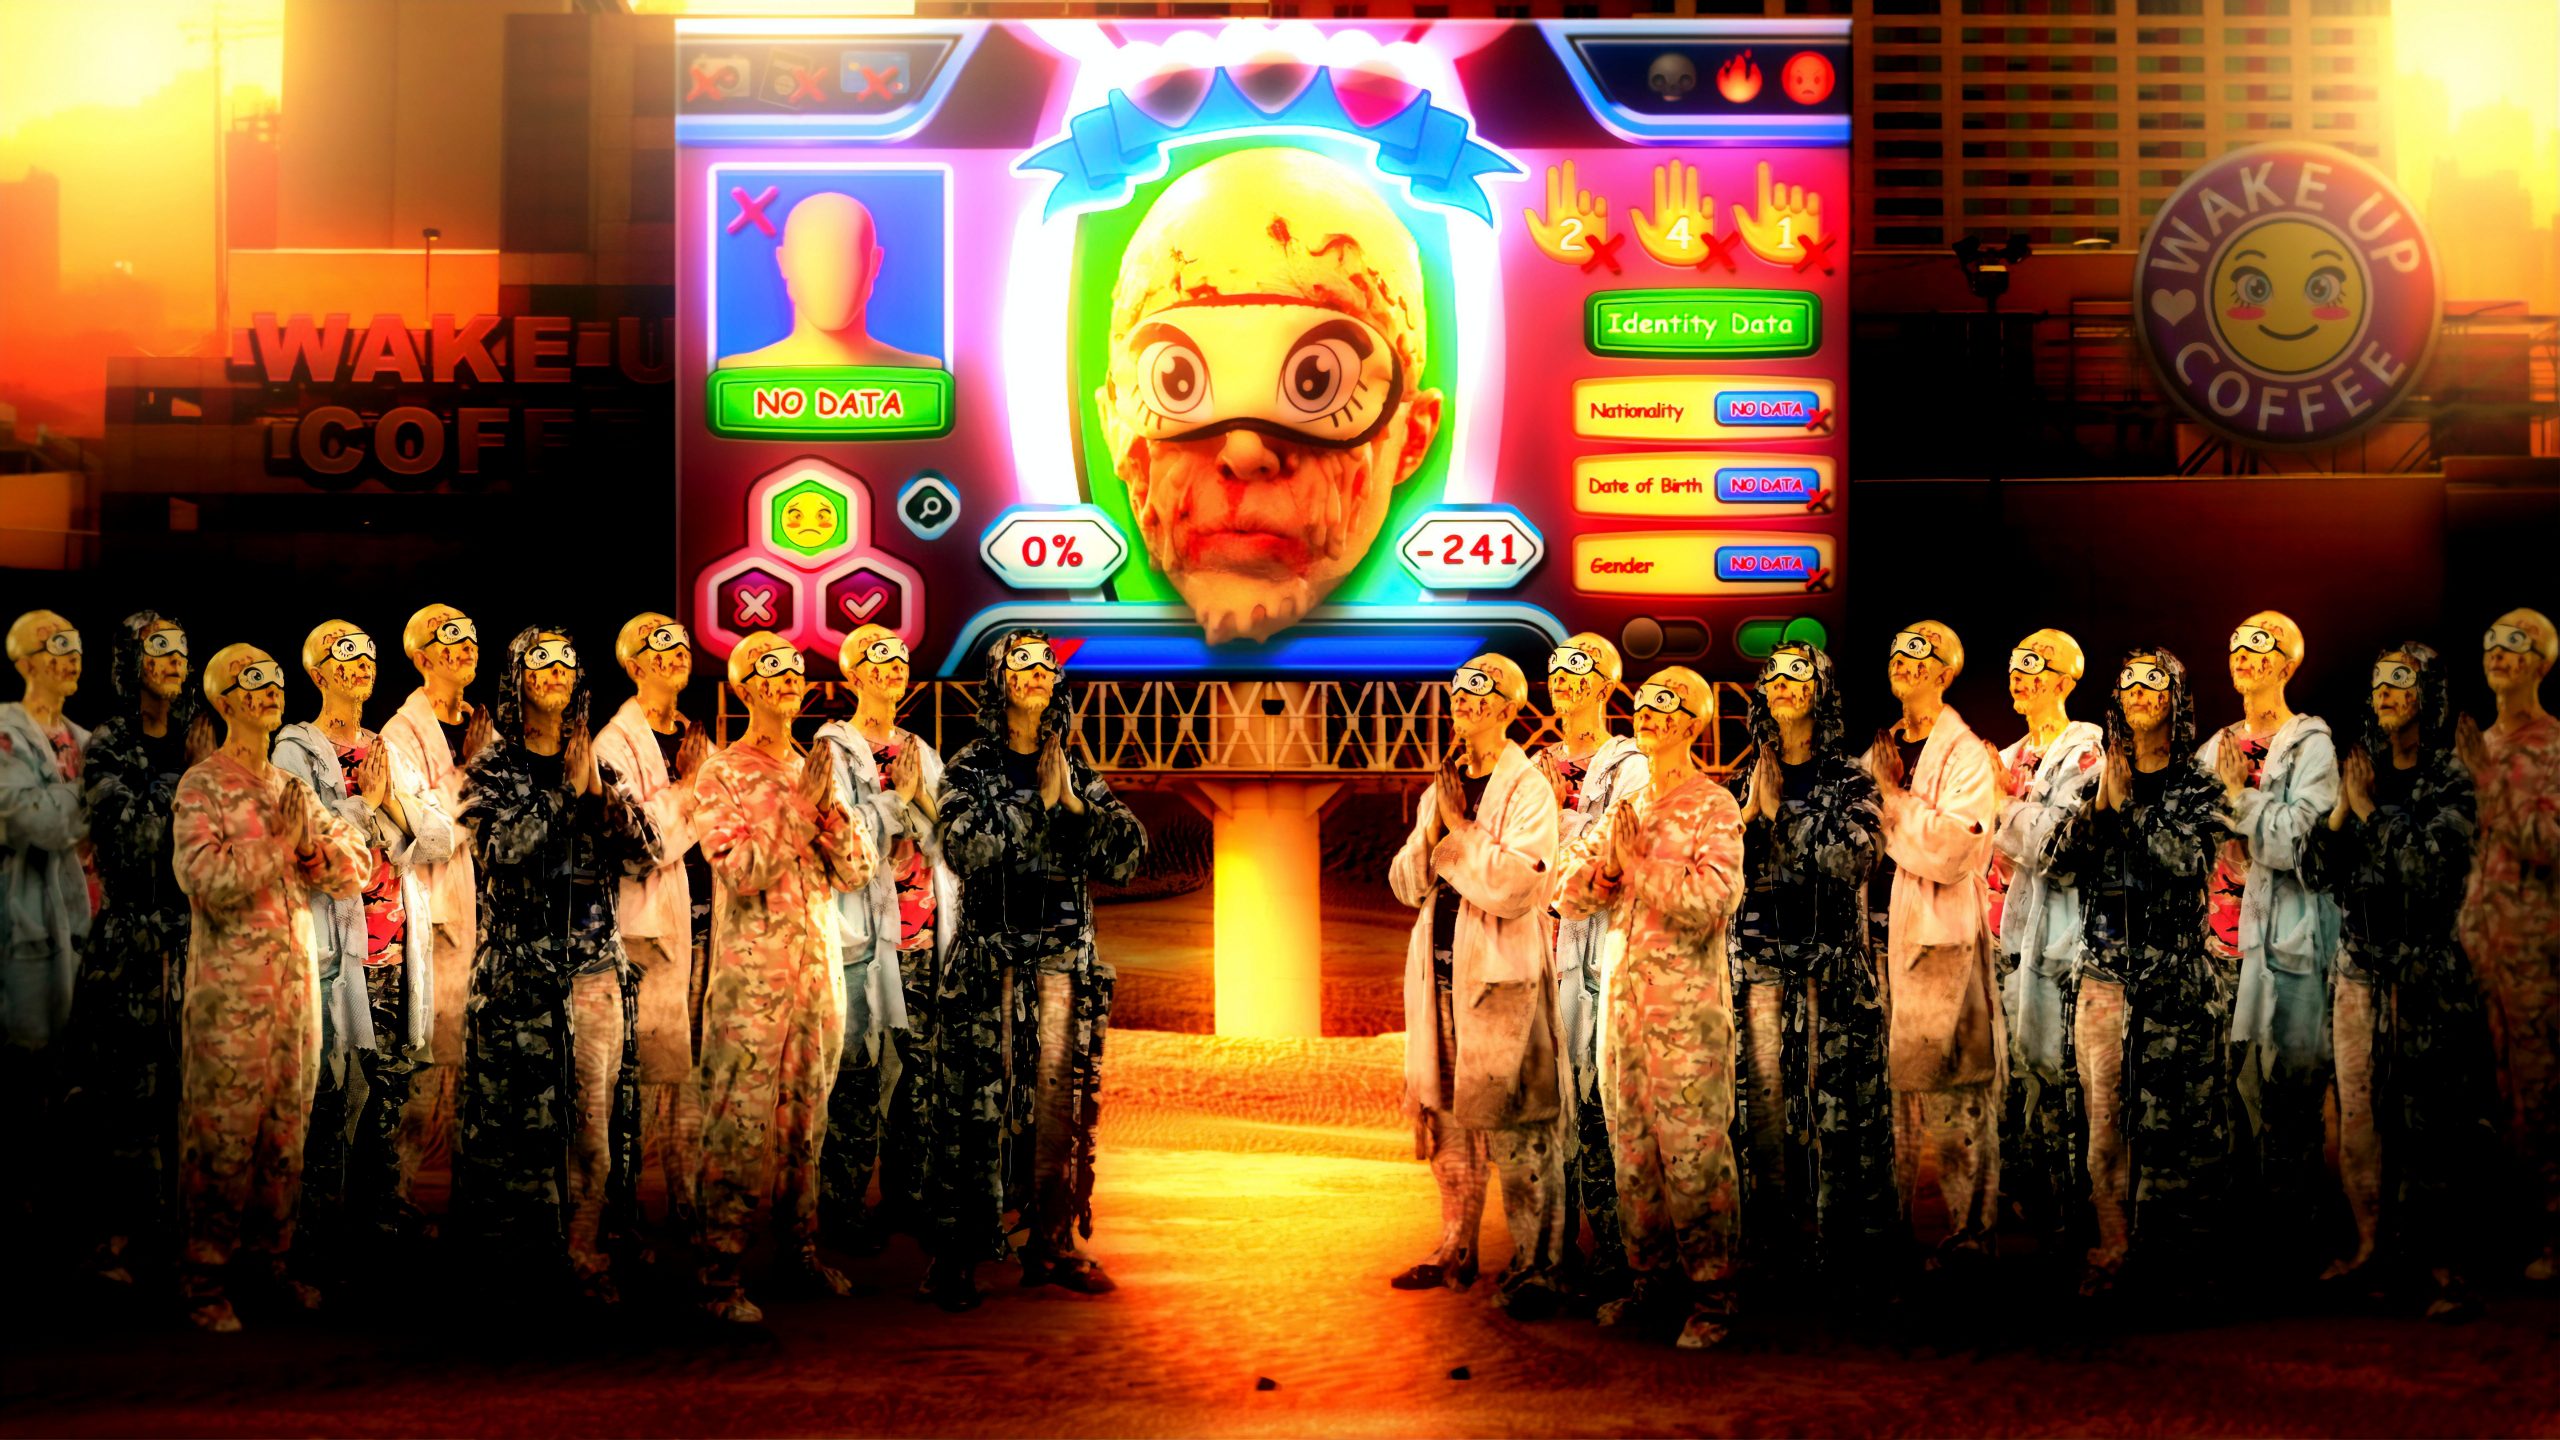 A bright yellow head with eye mask looks down upon a group of loving worshippers